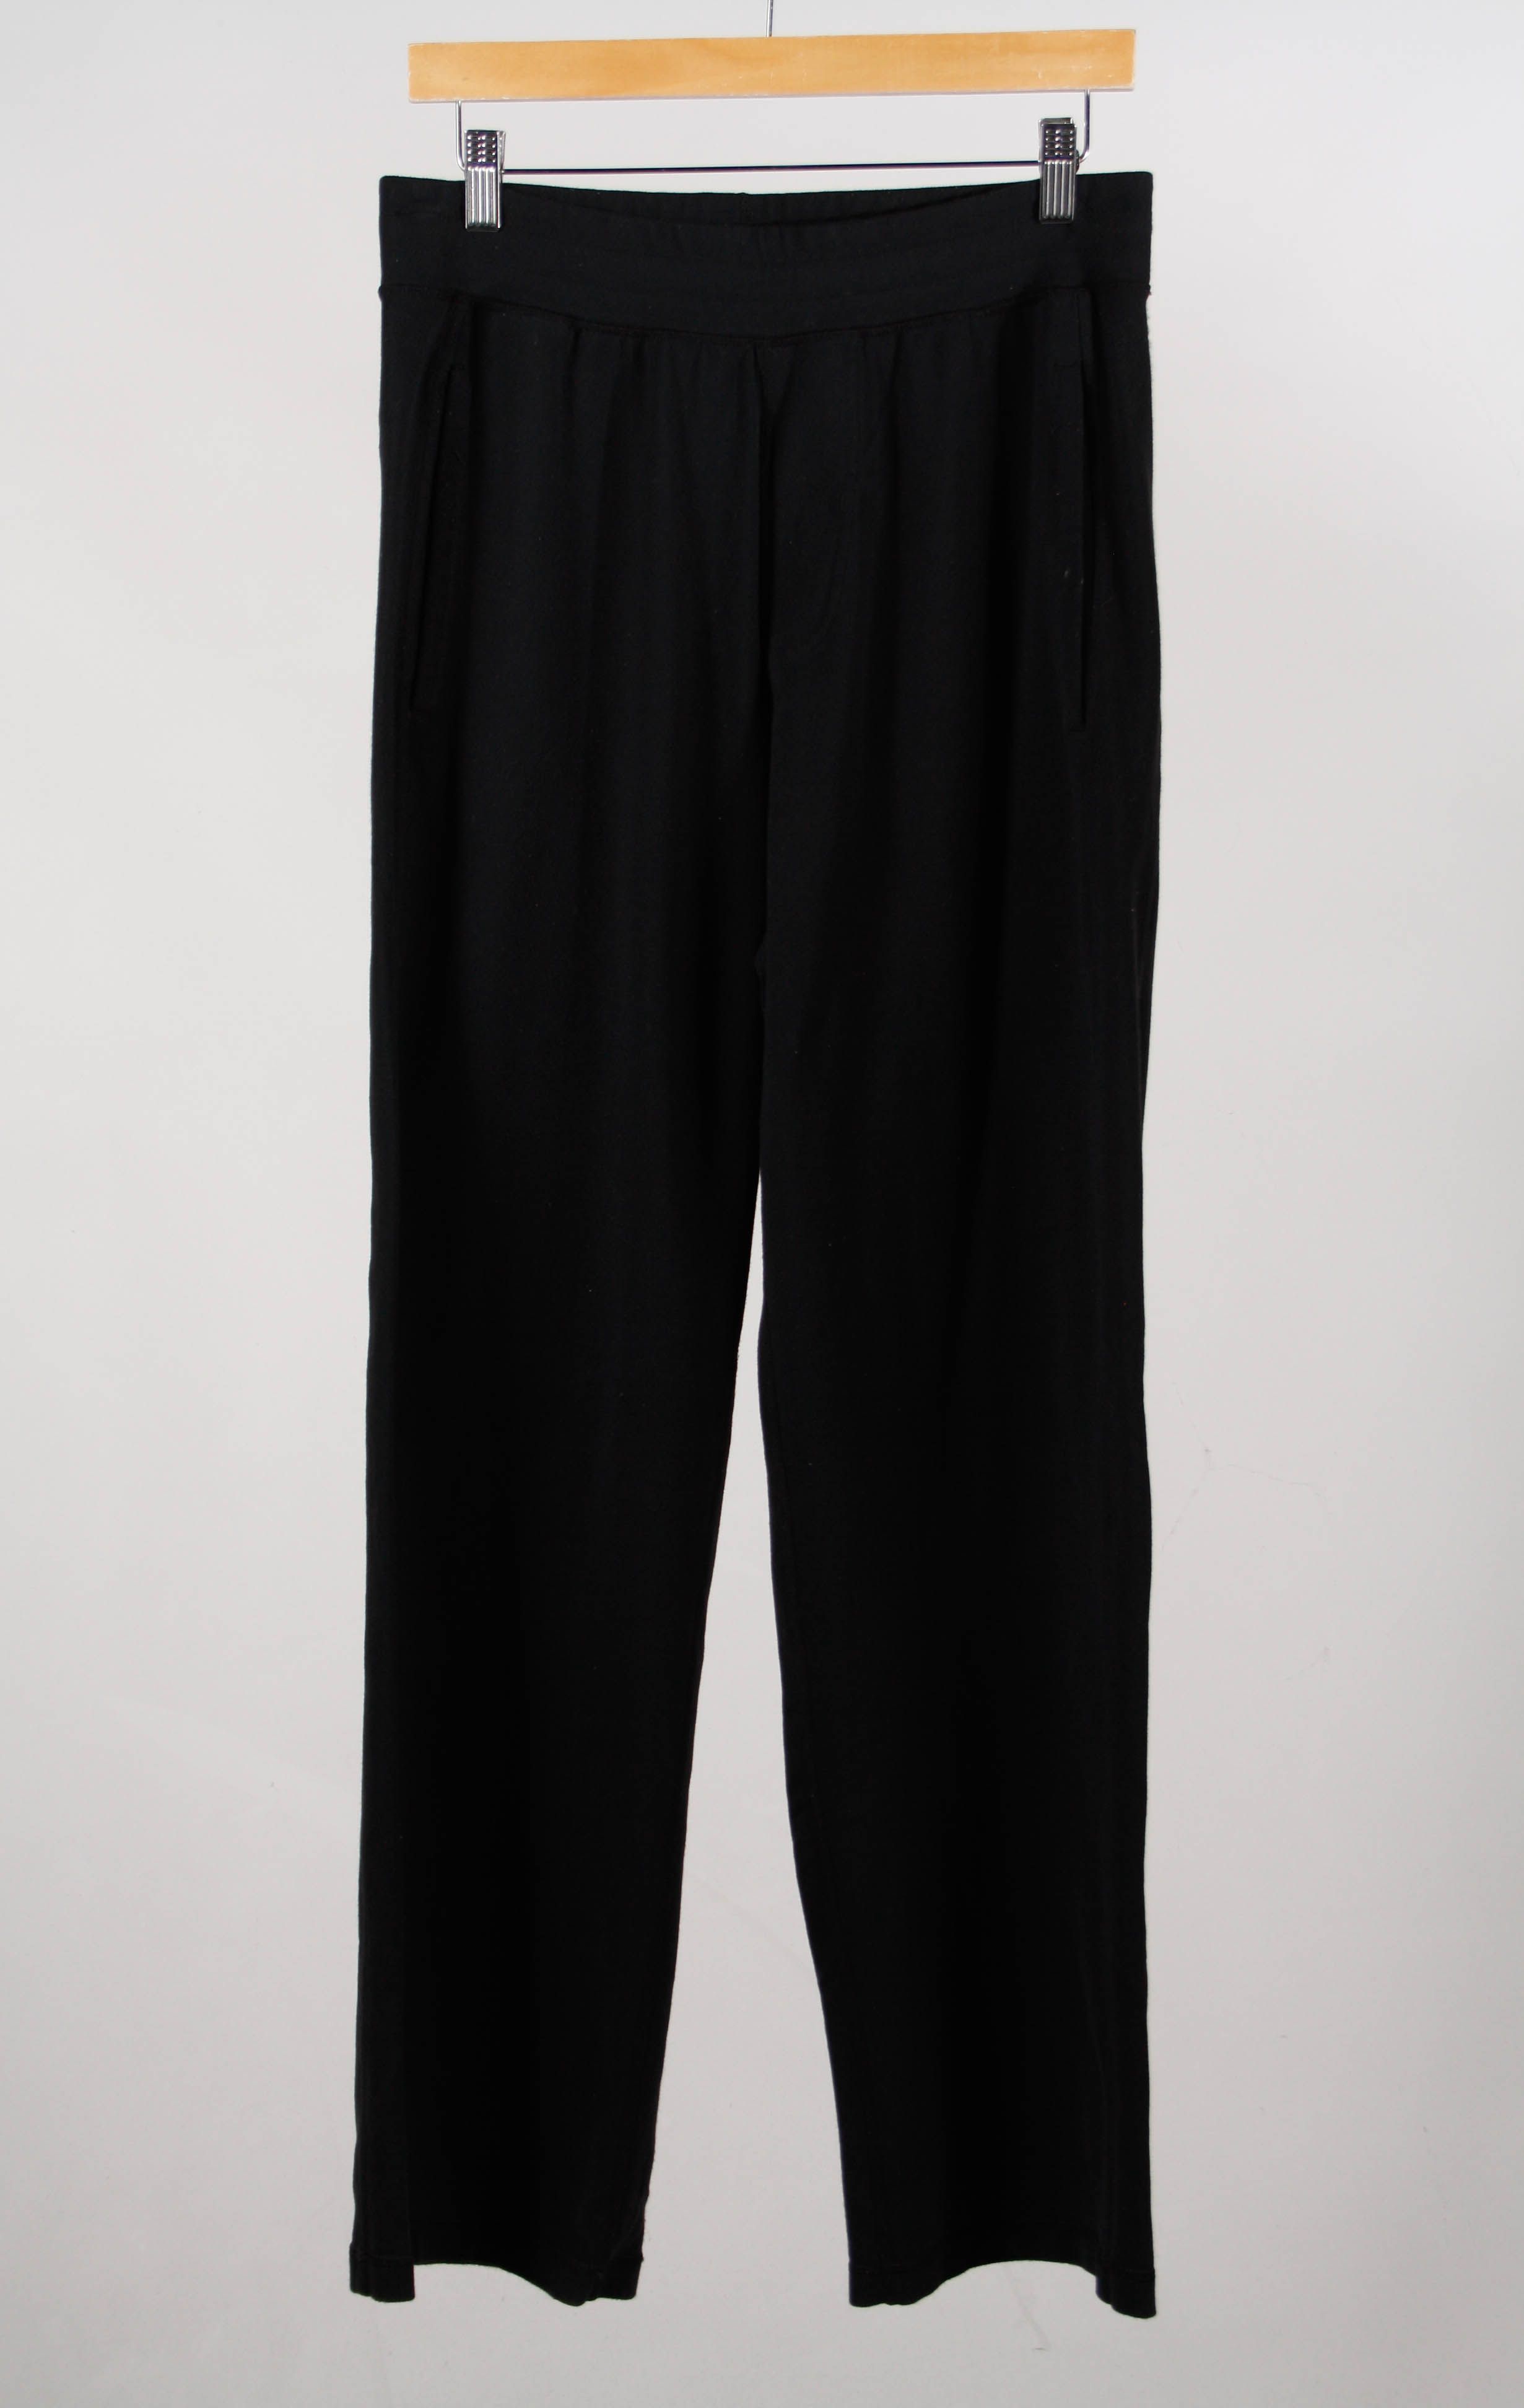 Relaxed Fit Stretch Pant 29L